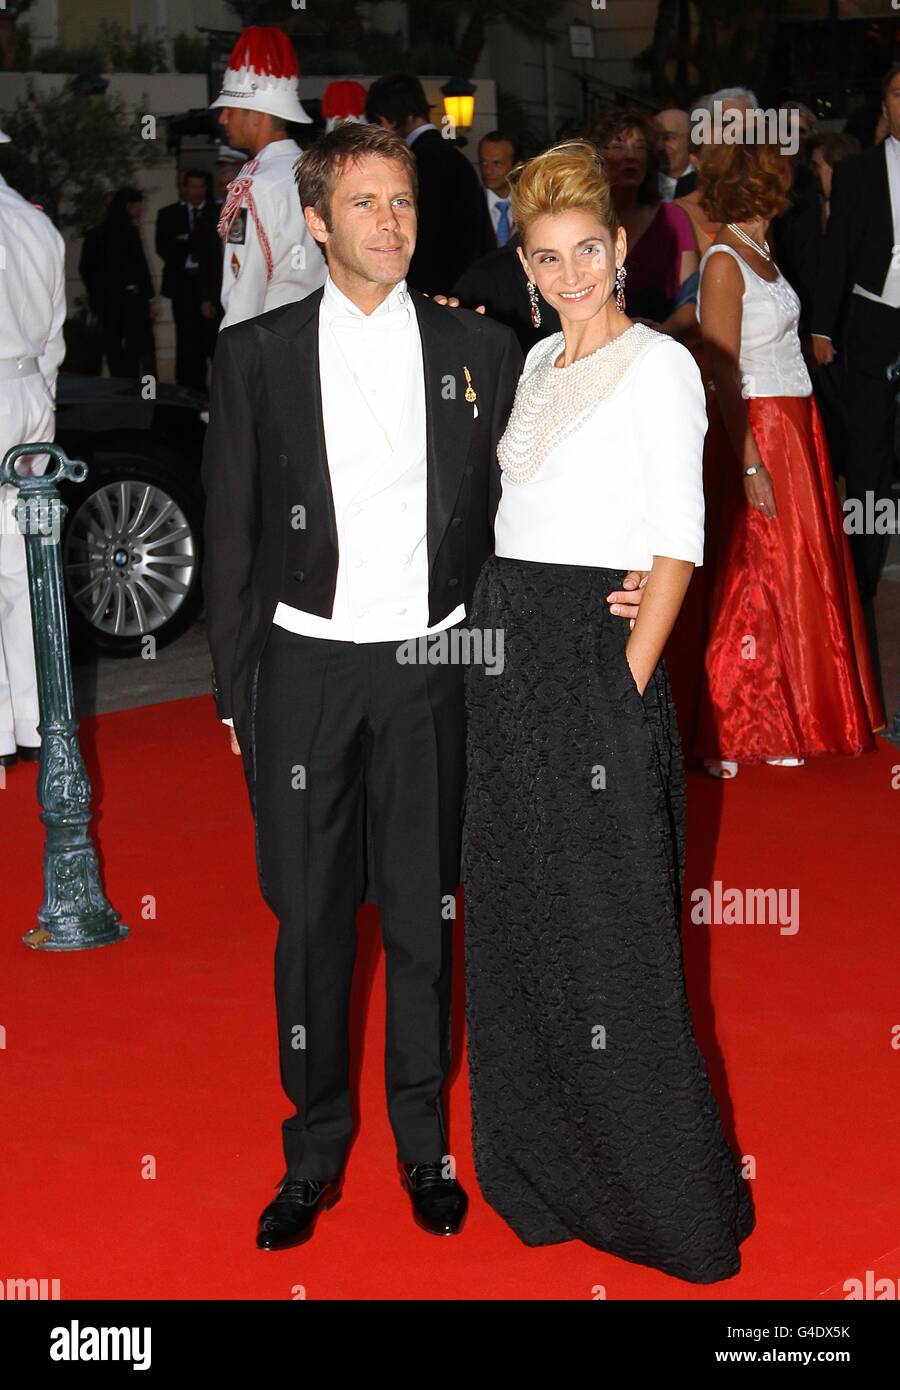 Emanuele Filiberto of Savoia and Princess Clotilde arriving for the official dinner for Prince Albert II of Monaco and Charlene Wittstock at the Monte Carlo Opera House. Stock Photo